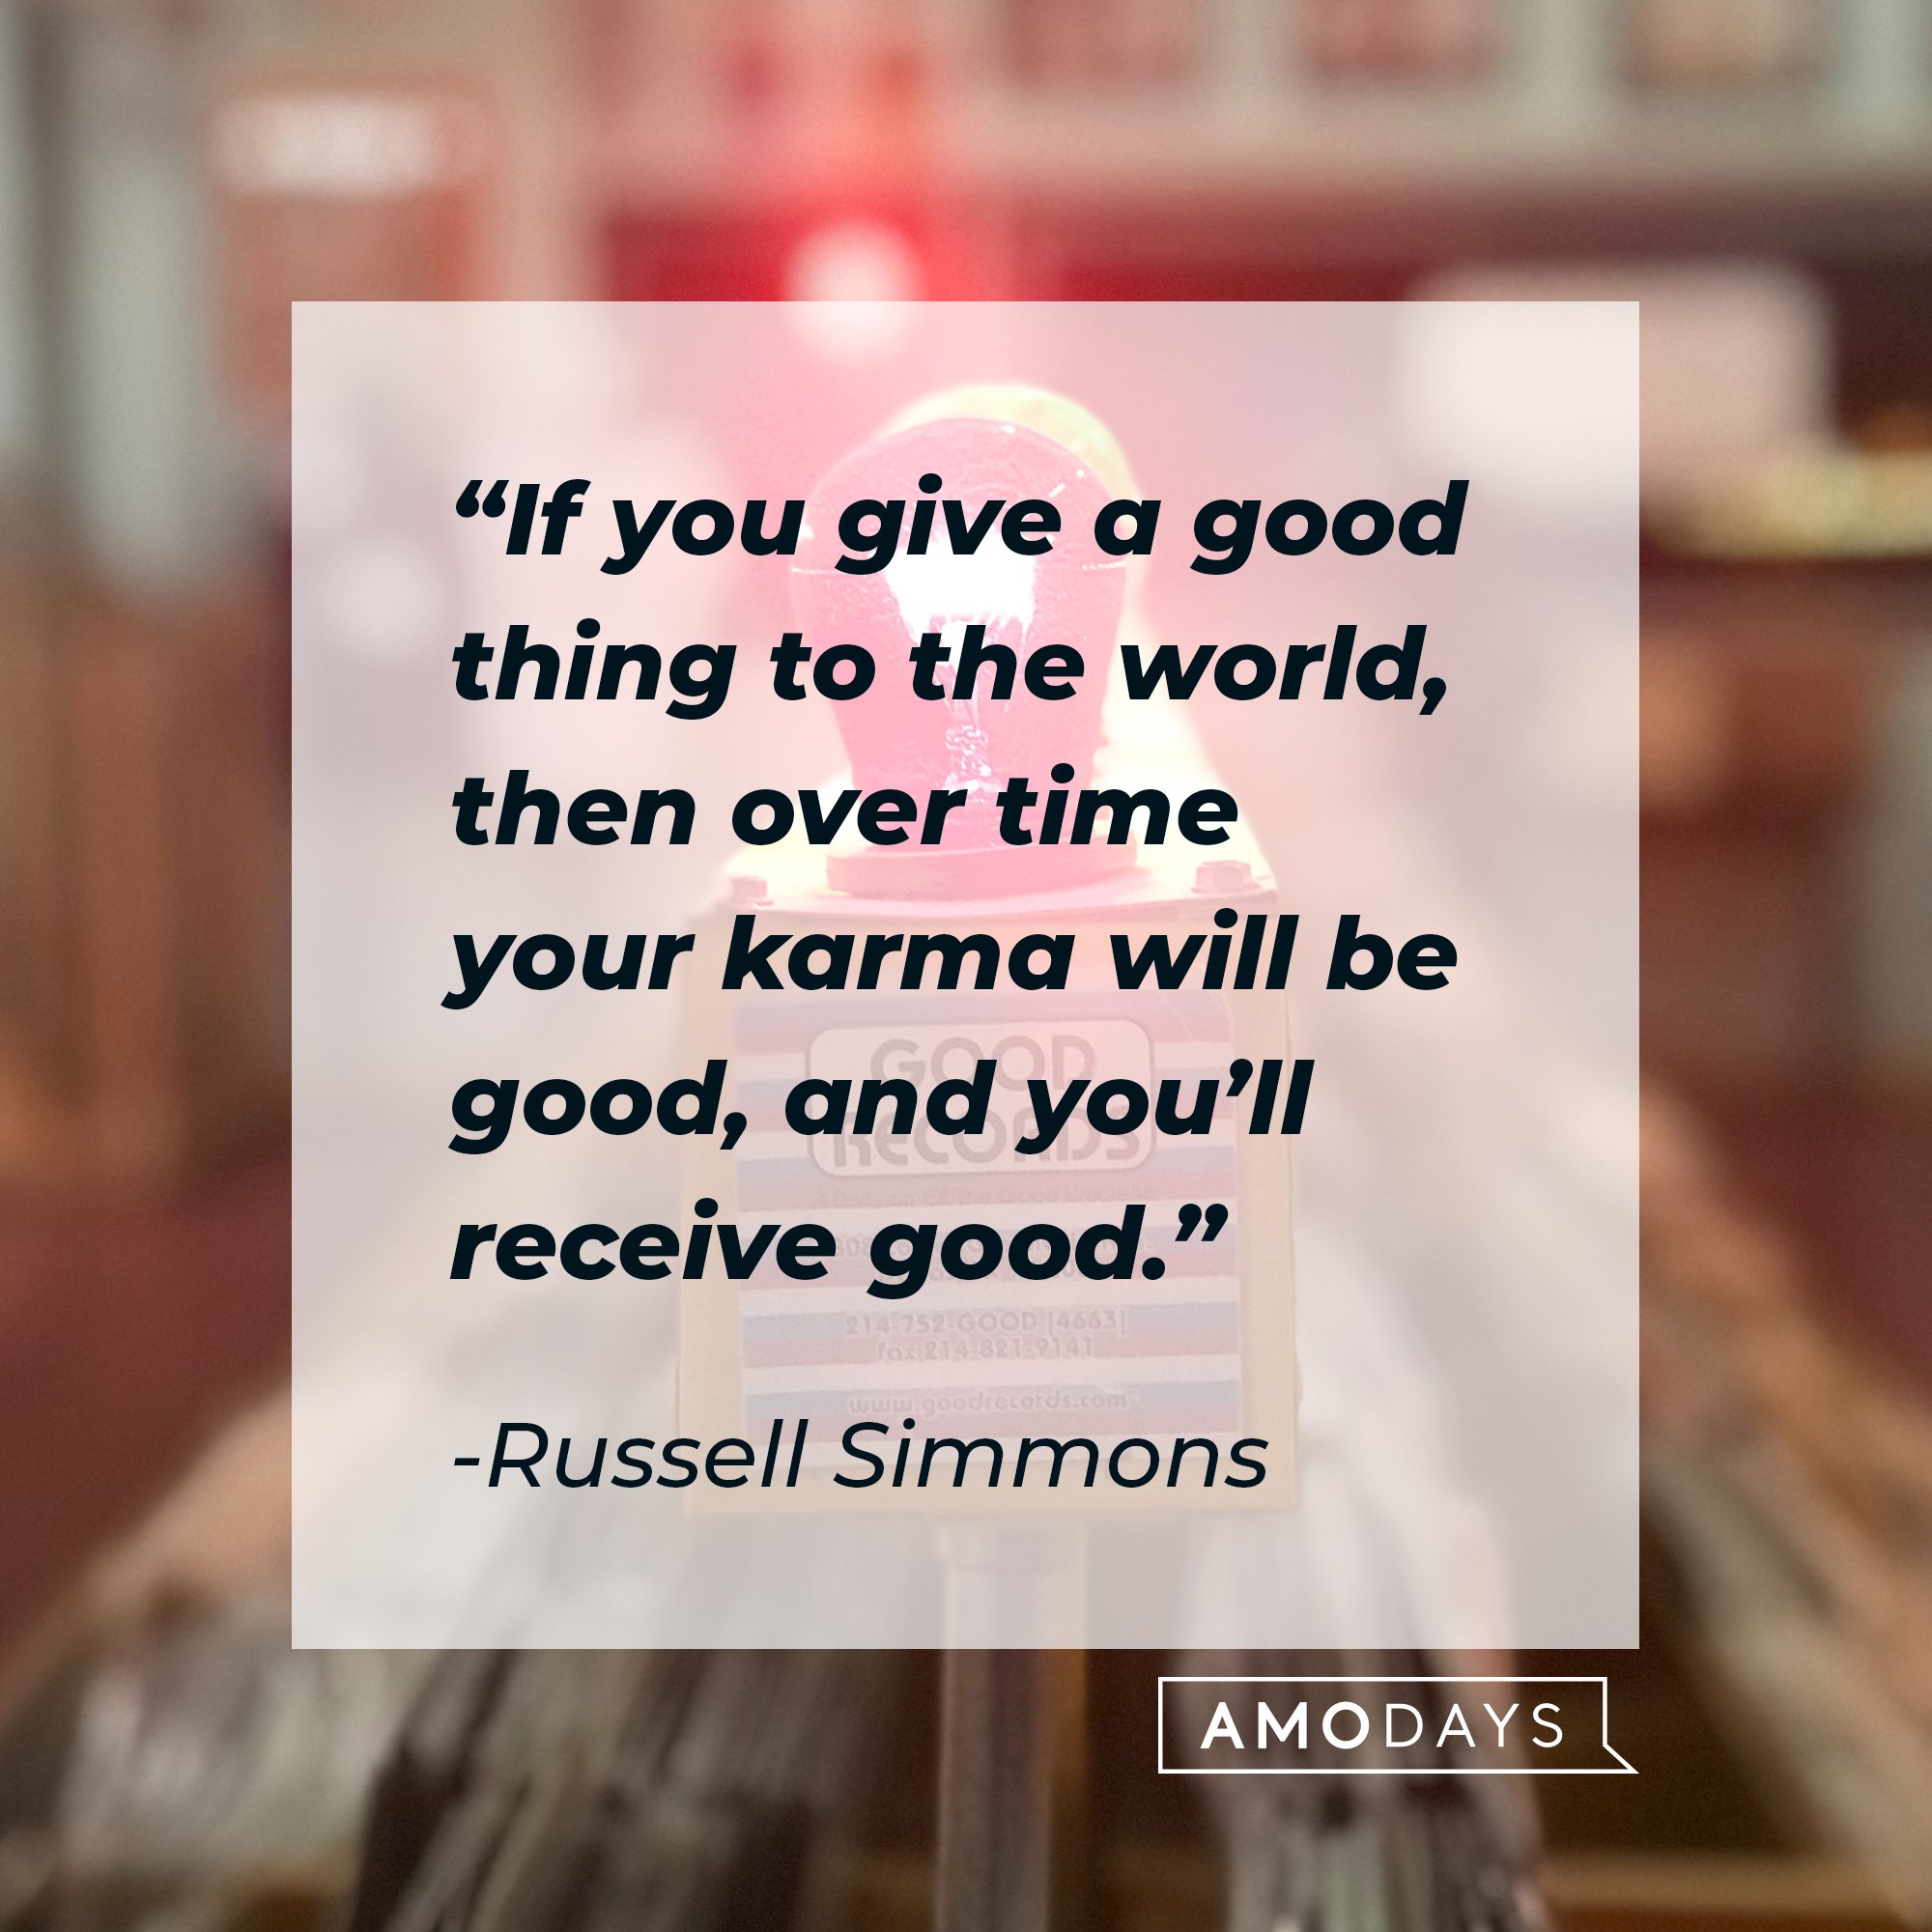 Russell Simmons' quote: "If you give a good thing to the world, then over time your karma will be good, and you’ll receive good." | Image: AmoDays